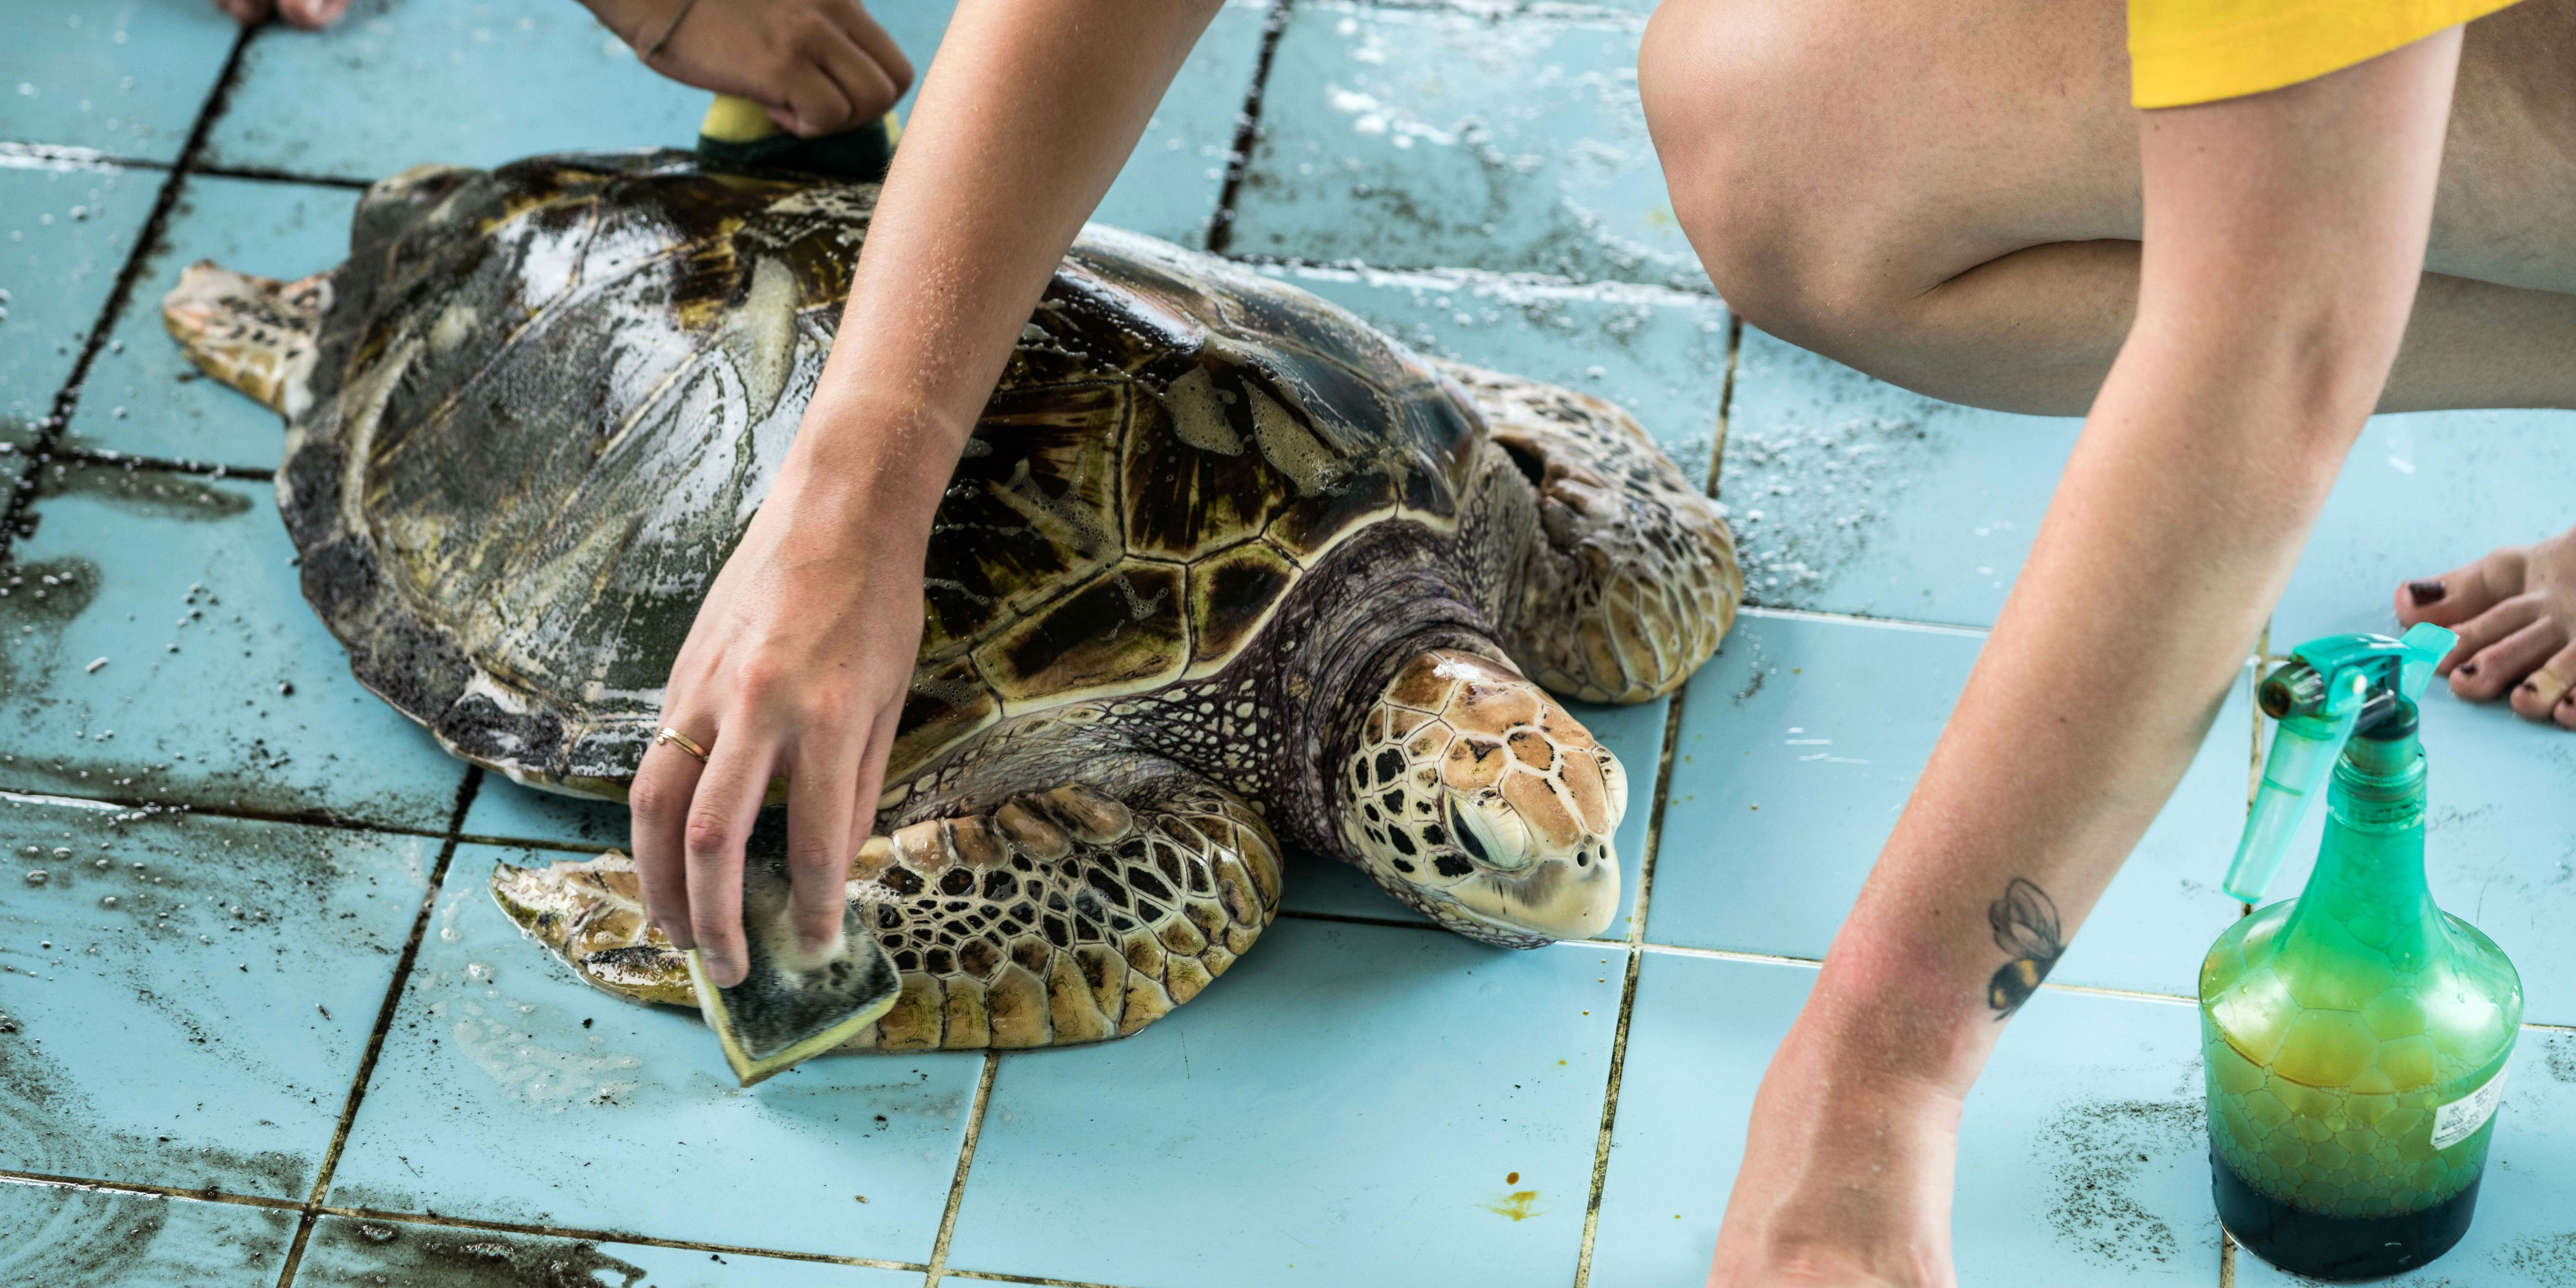 A GVI participant cleans and disinfects an endangered hawksbill turtle as part of one of GVI's sea turtle volunteer programs.